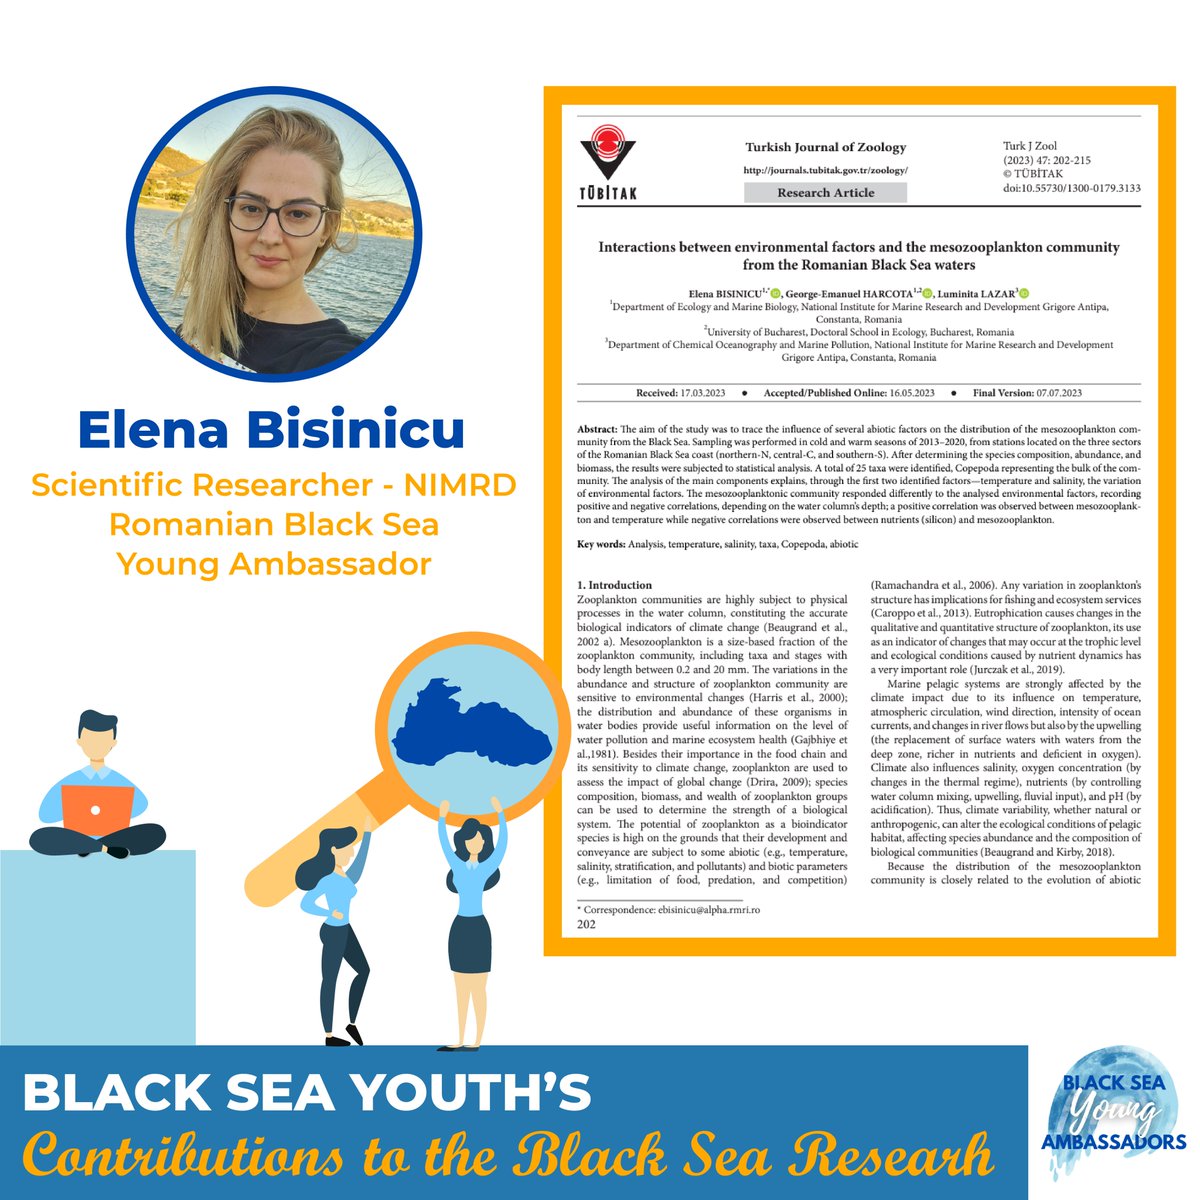 #BlackSeaYouth brings new insights into #BlackSea research🌊 Explore the article of 🇷🇴 BSYA Elena Bisinicu, as she focuses on the interactions between environmental factors and the mesozooplankton community from the Romanian Black Sea waters. Read now⤵️ journals.tubitak.gov.tr/zoology/vol47/…